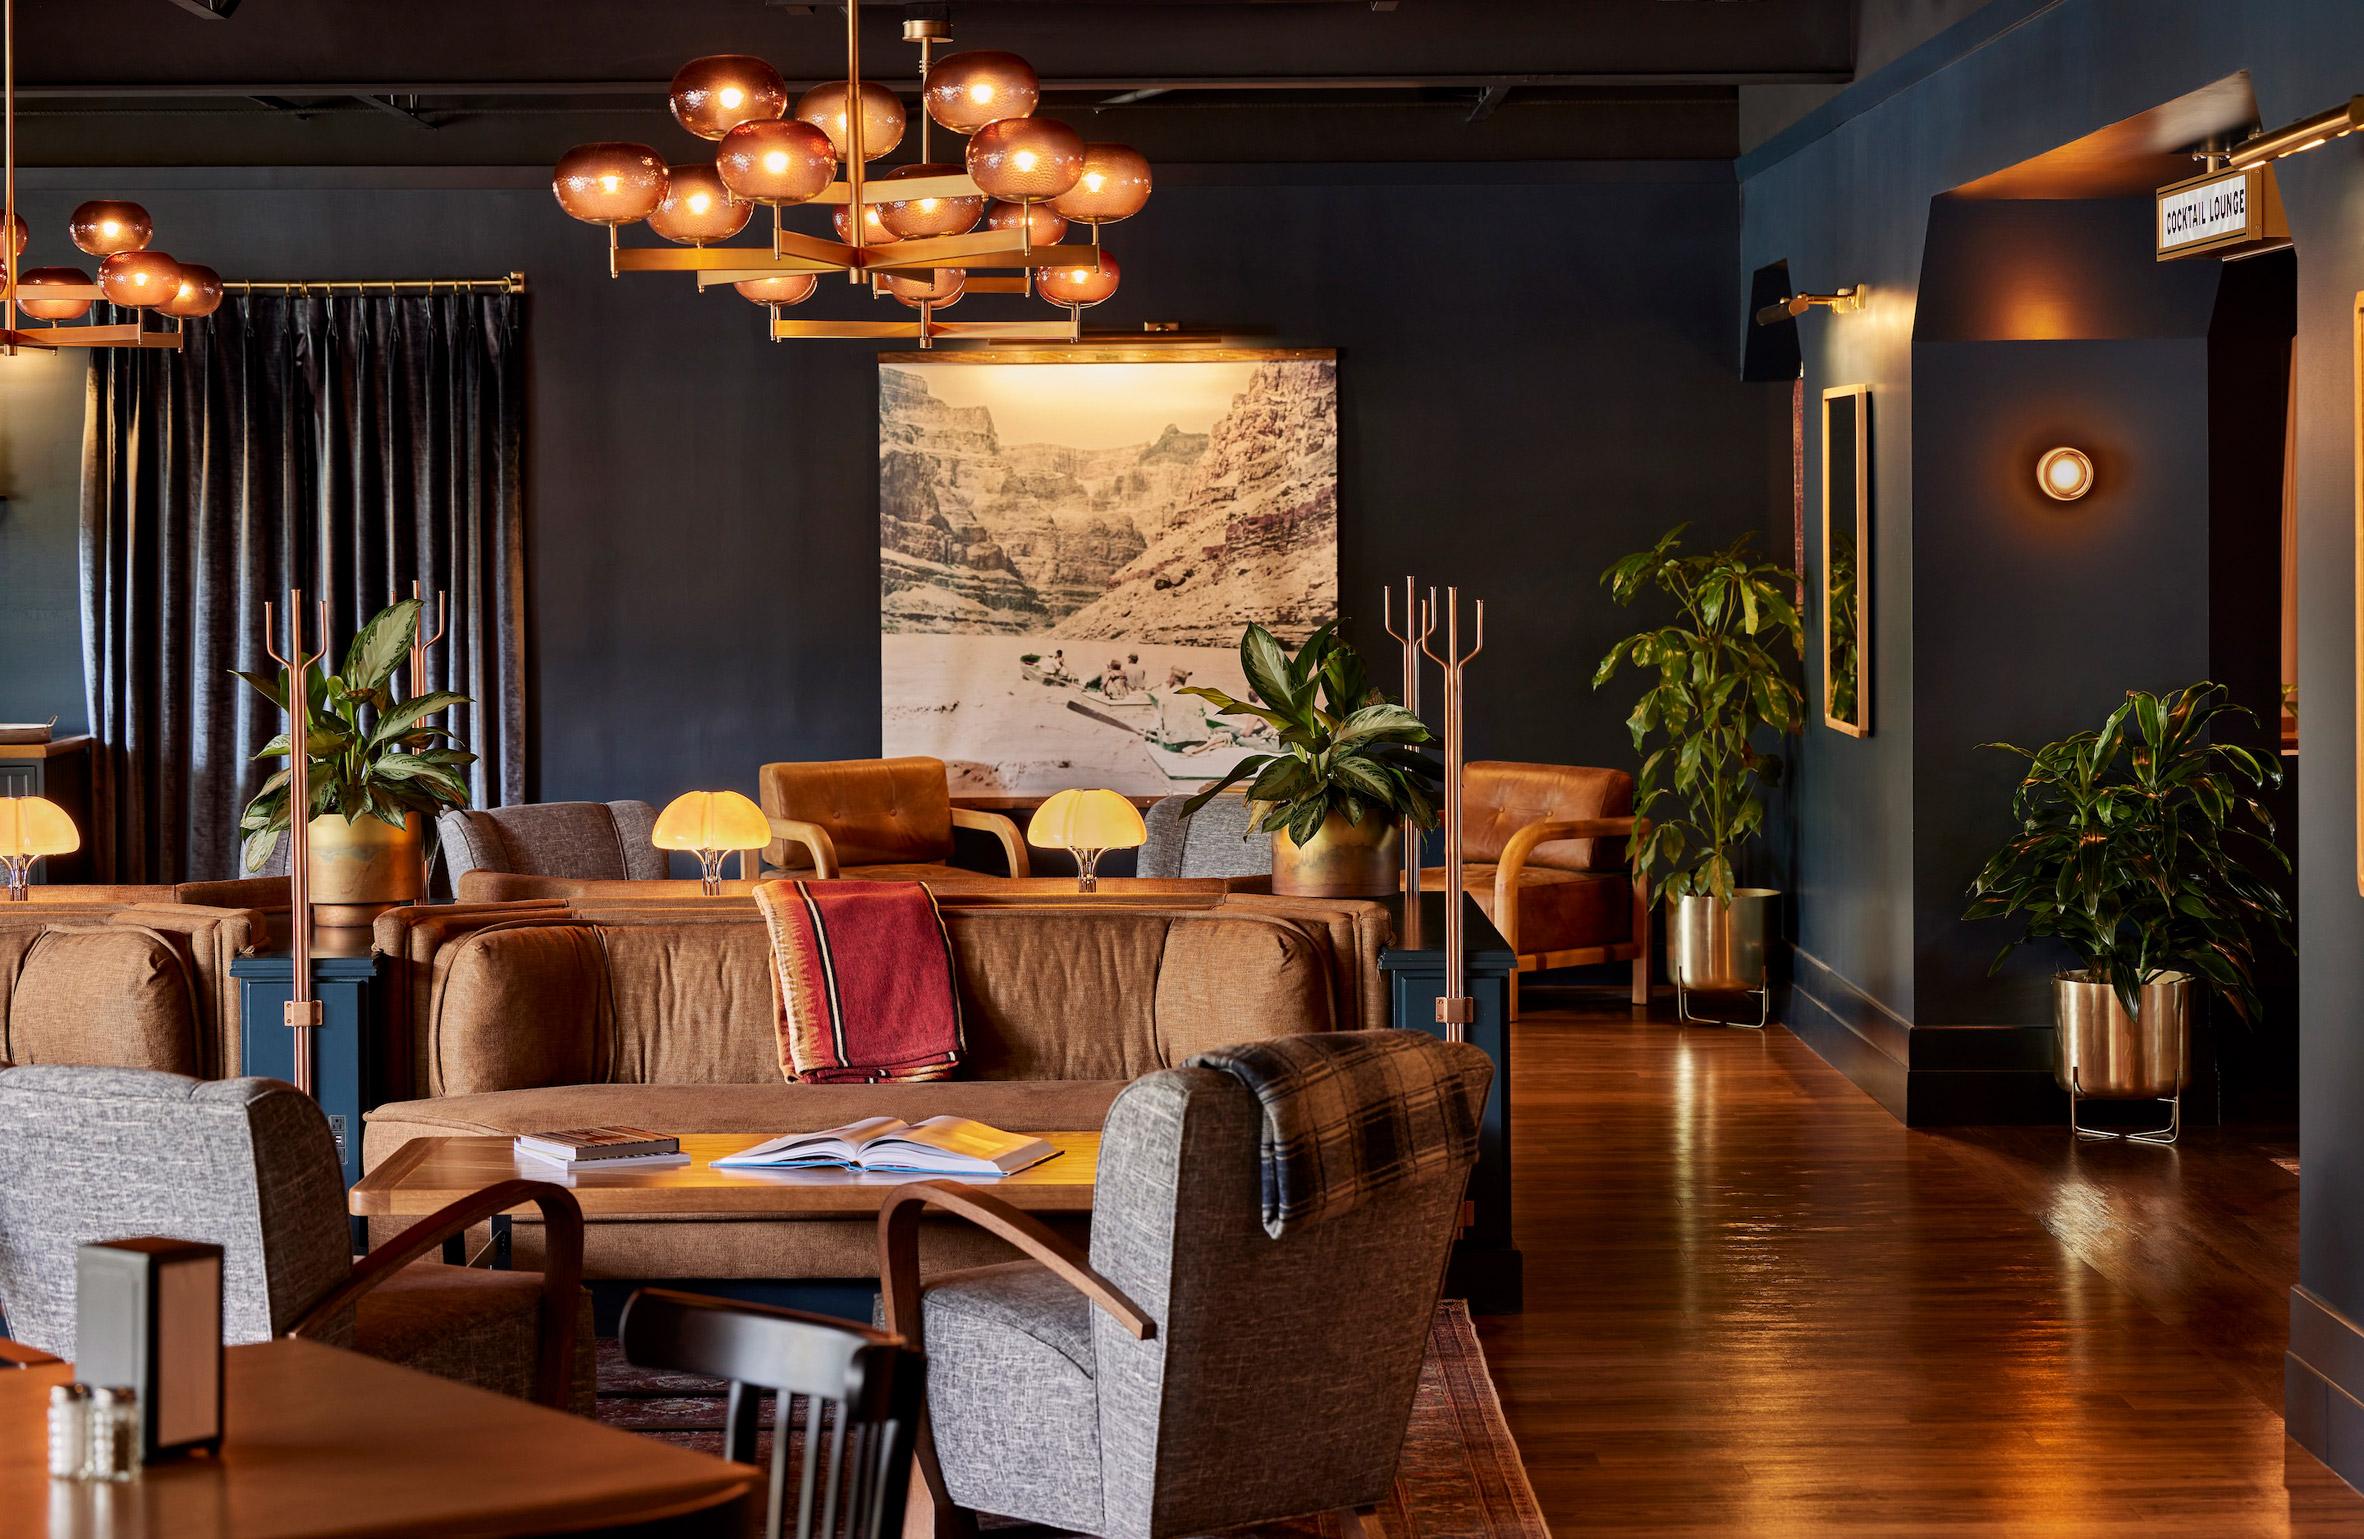 Hotel lounge with dark blue walls and amber lighting